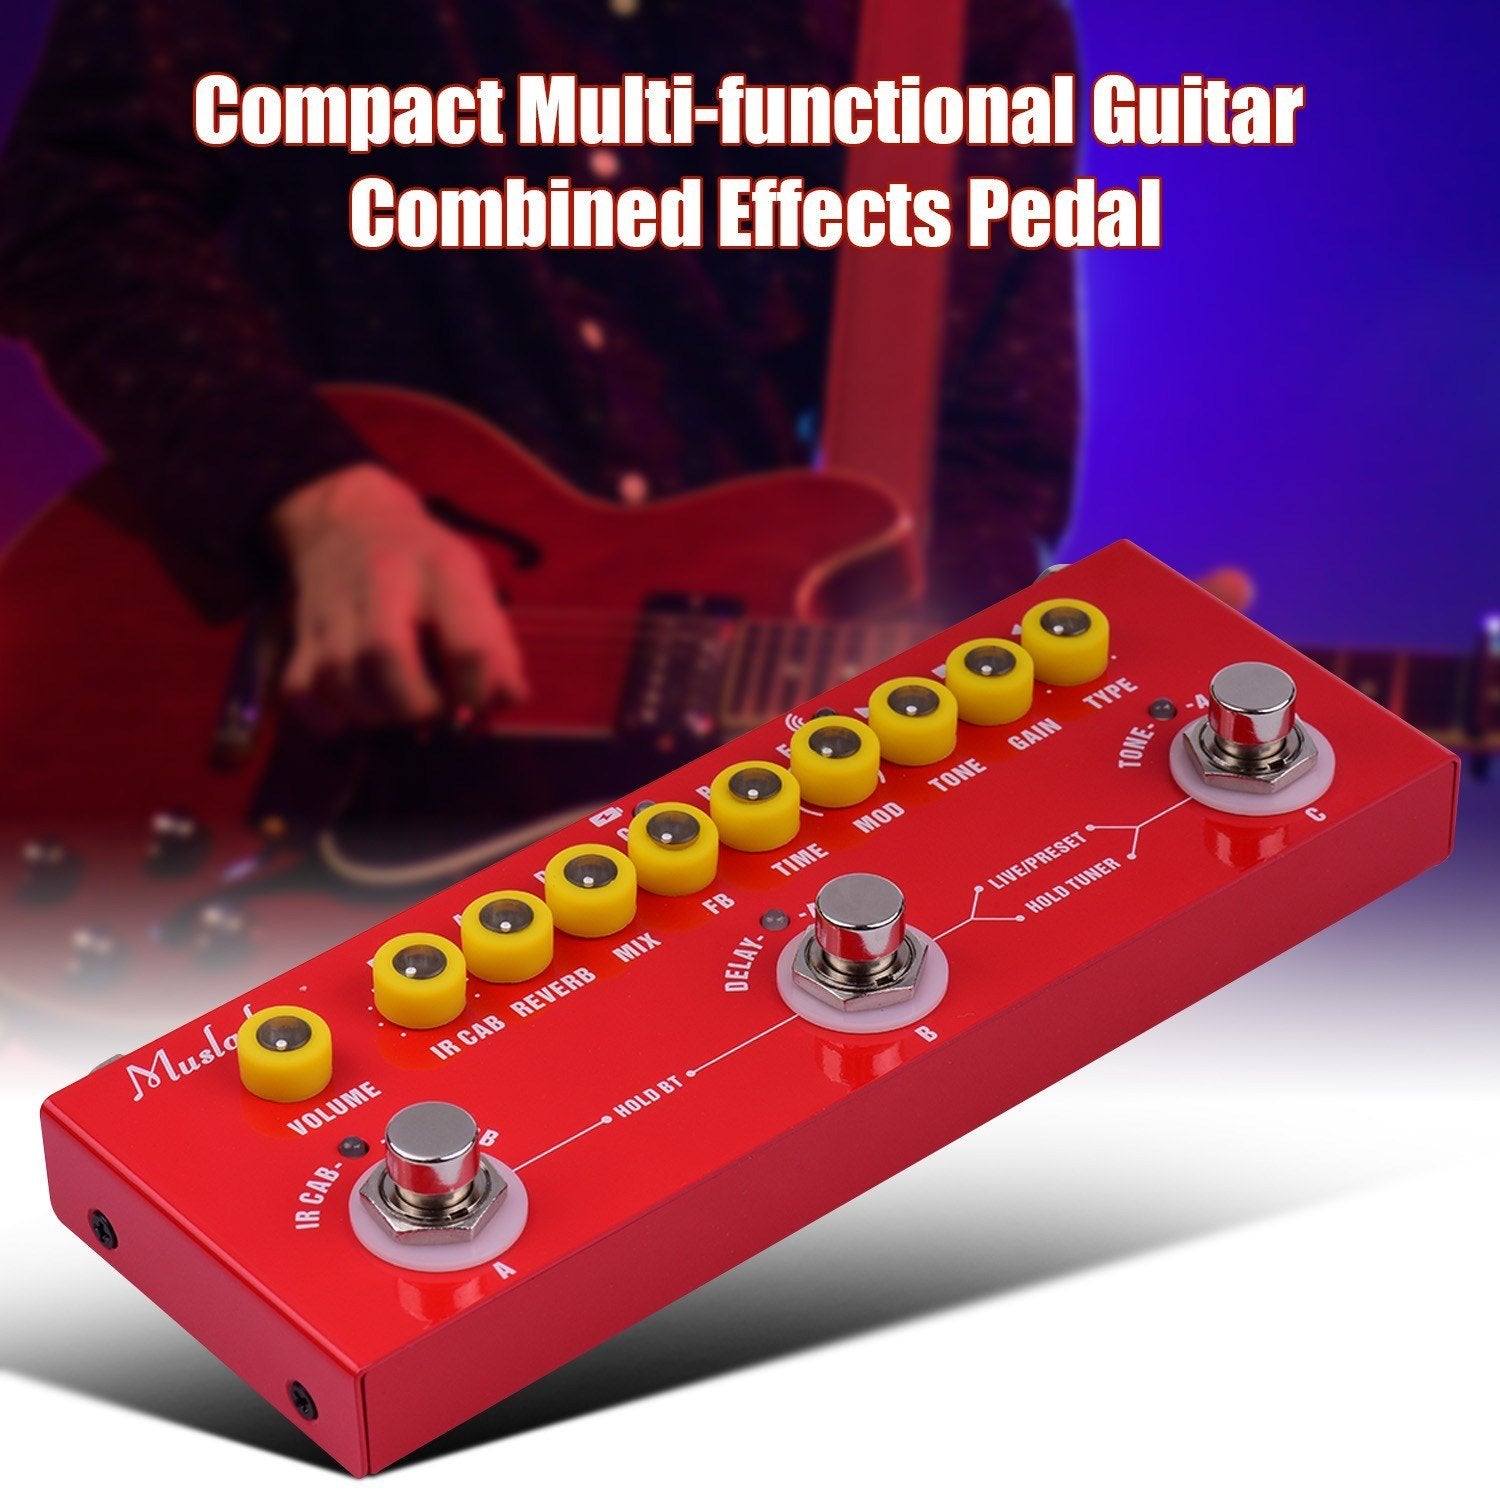 Portable Multi-functional Electric Guitar Combined Effects Pedal